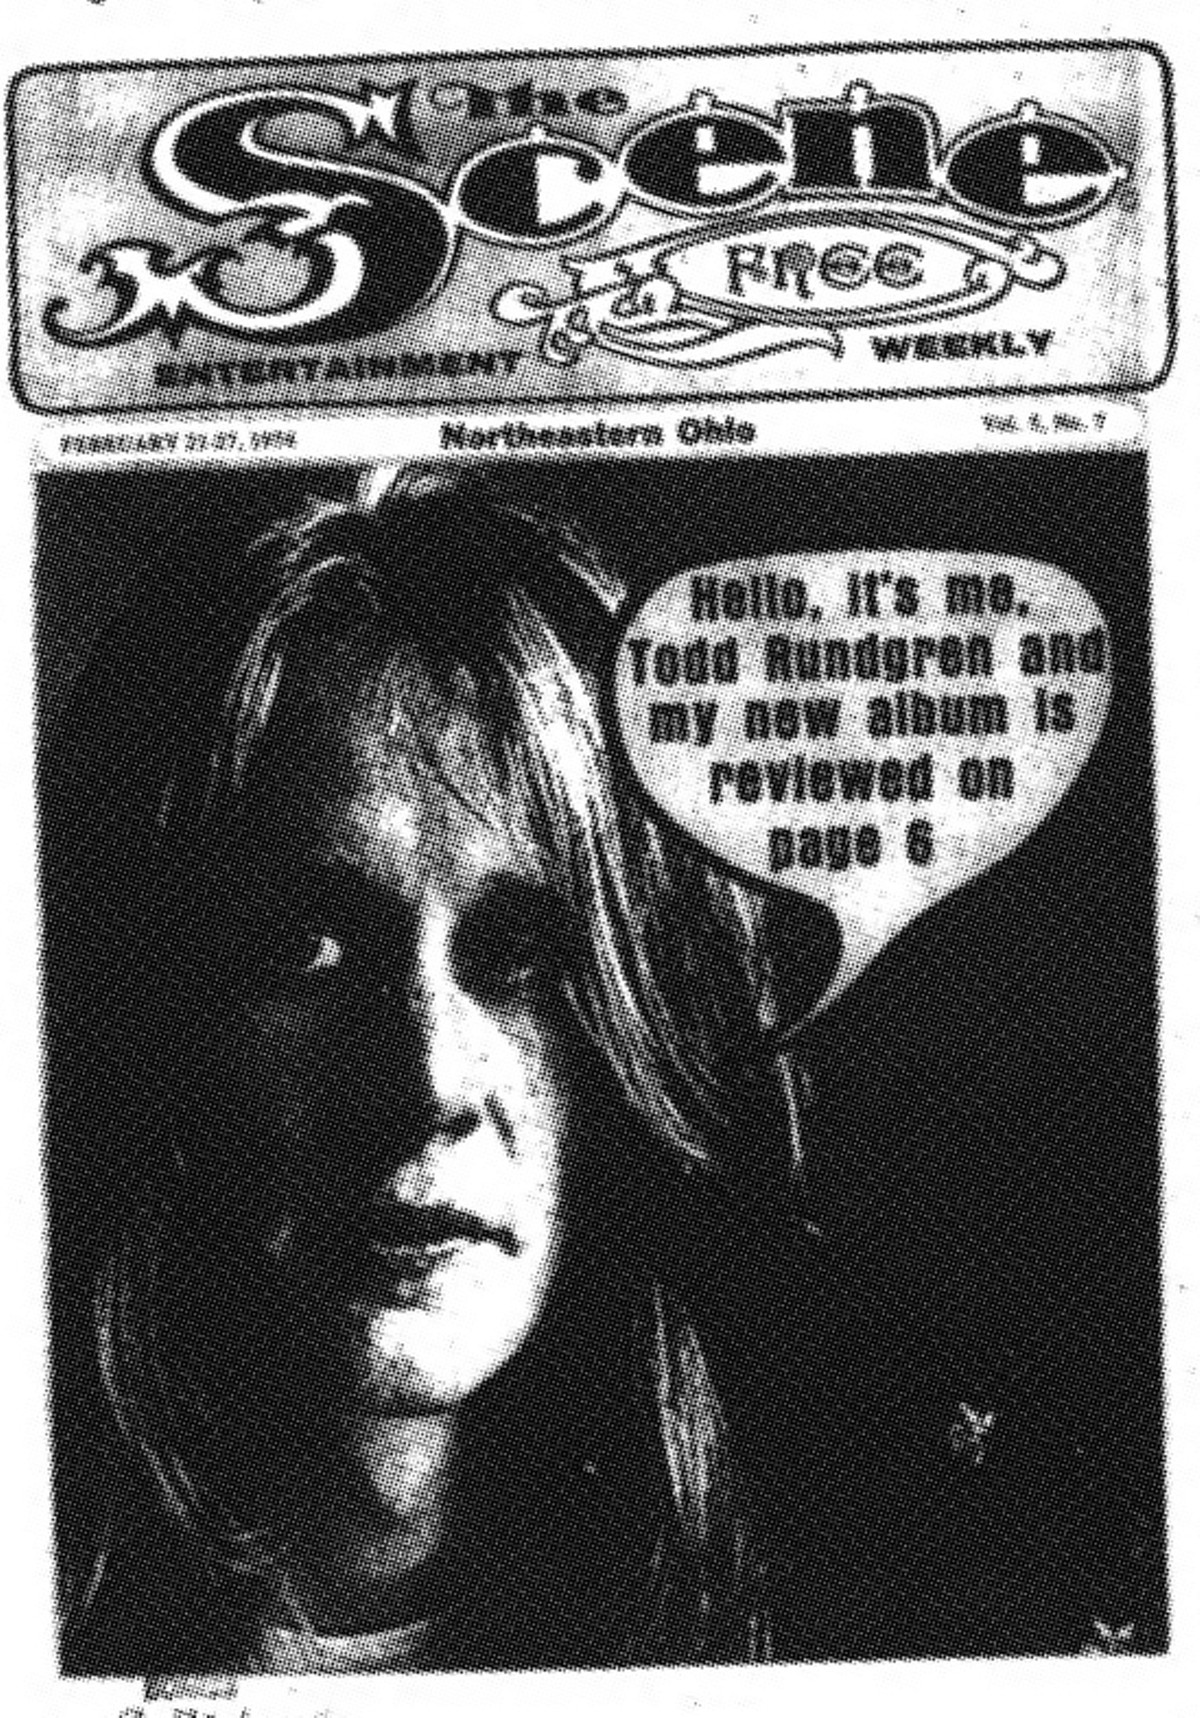 Rewind: 47 Years Ago On This Date Todd Rundgren Made the Cover of Scene